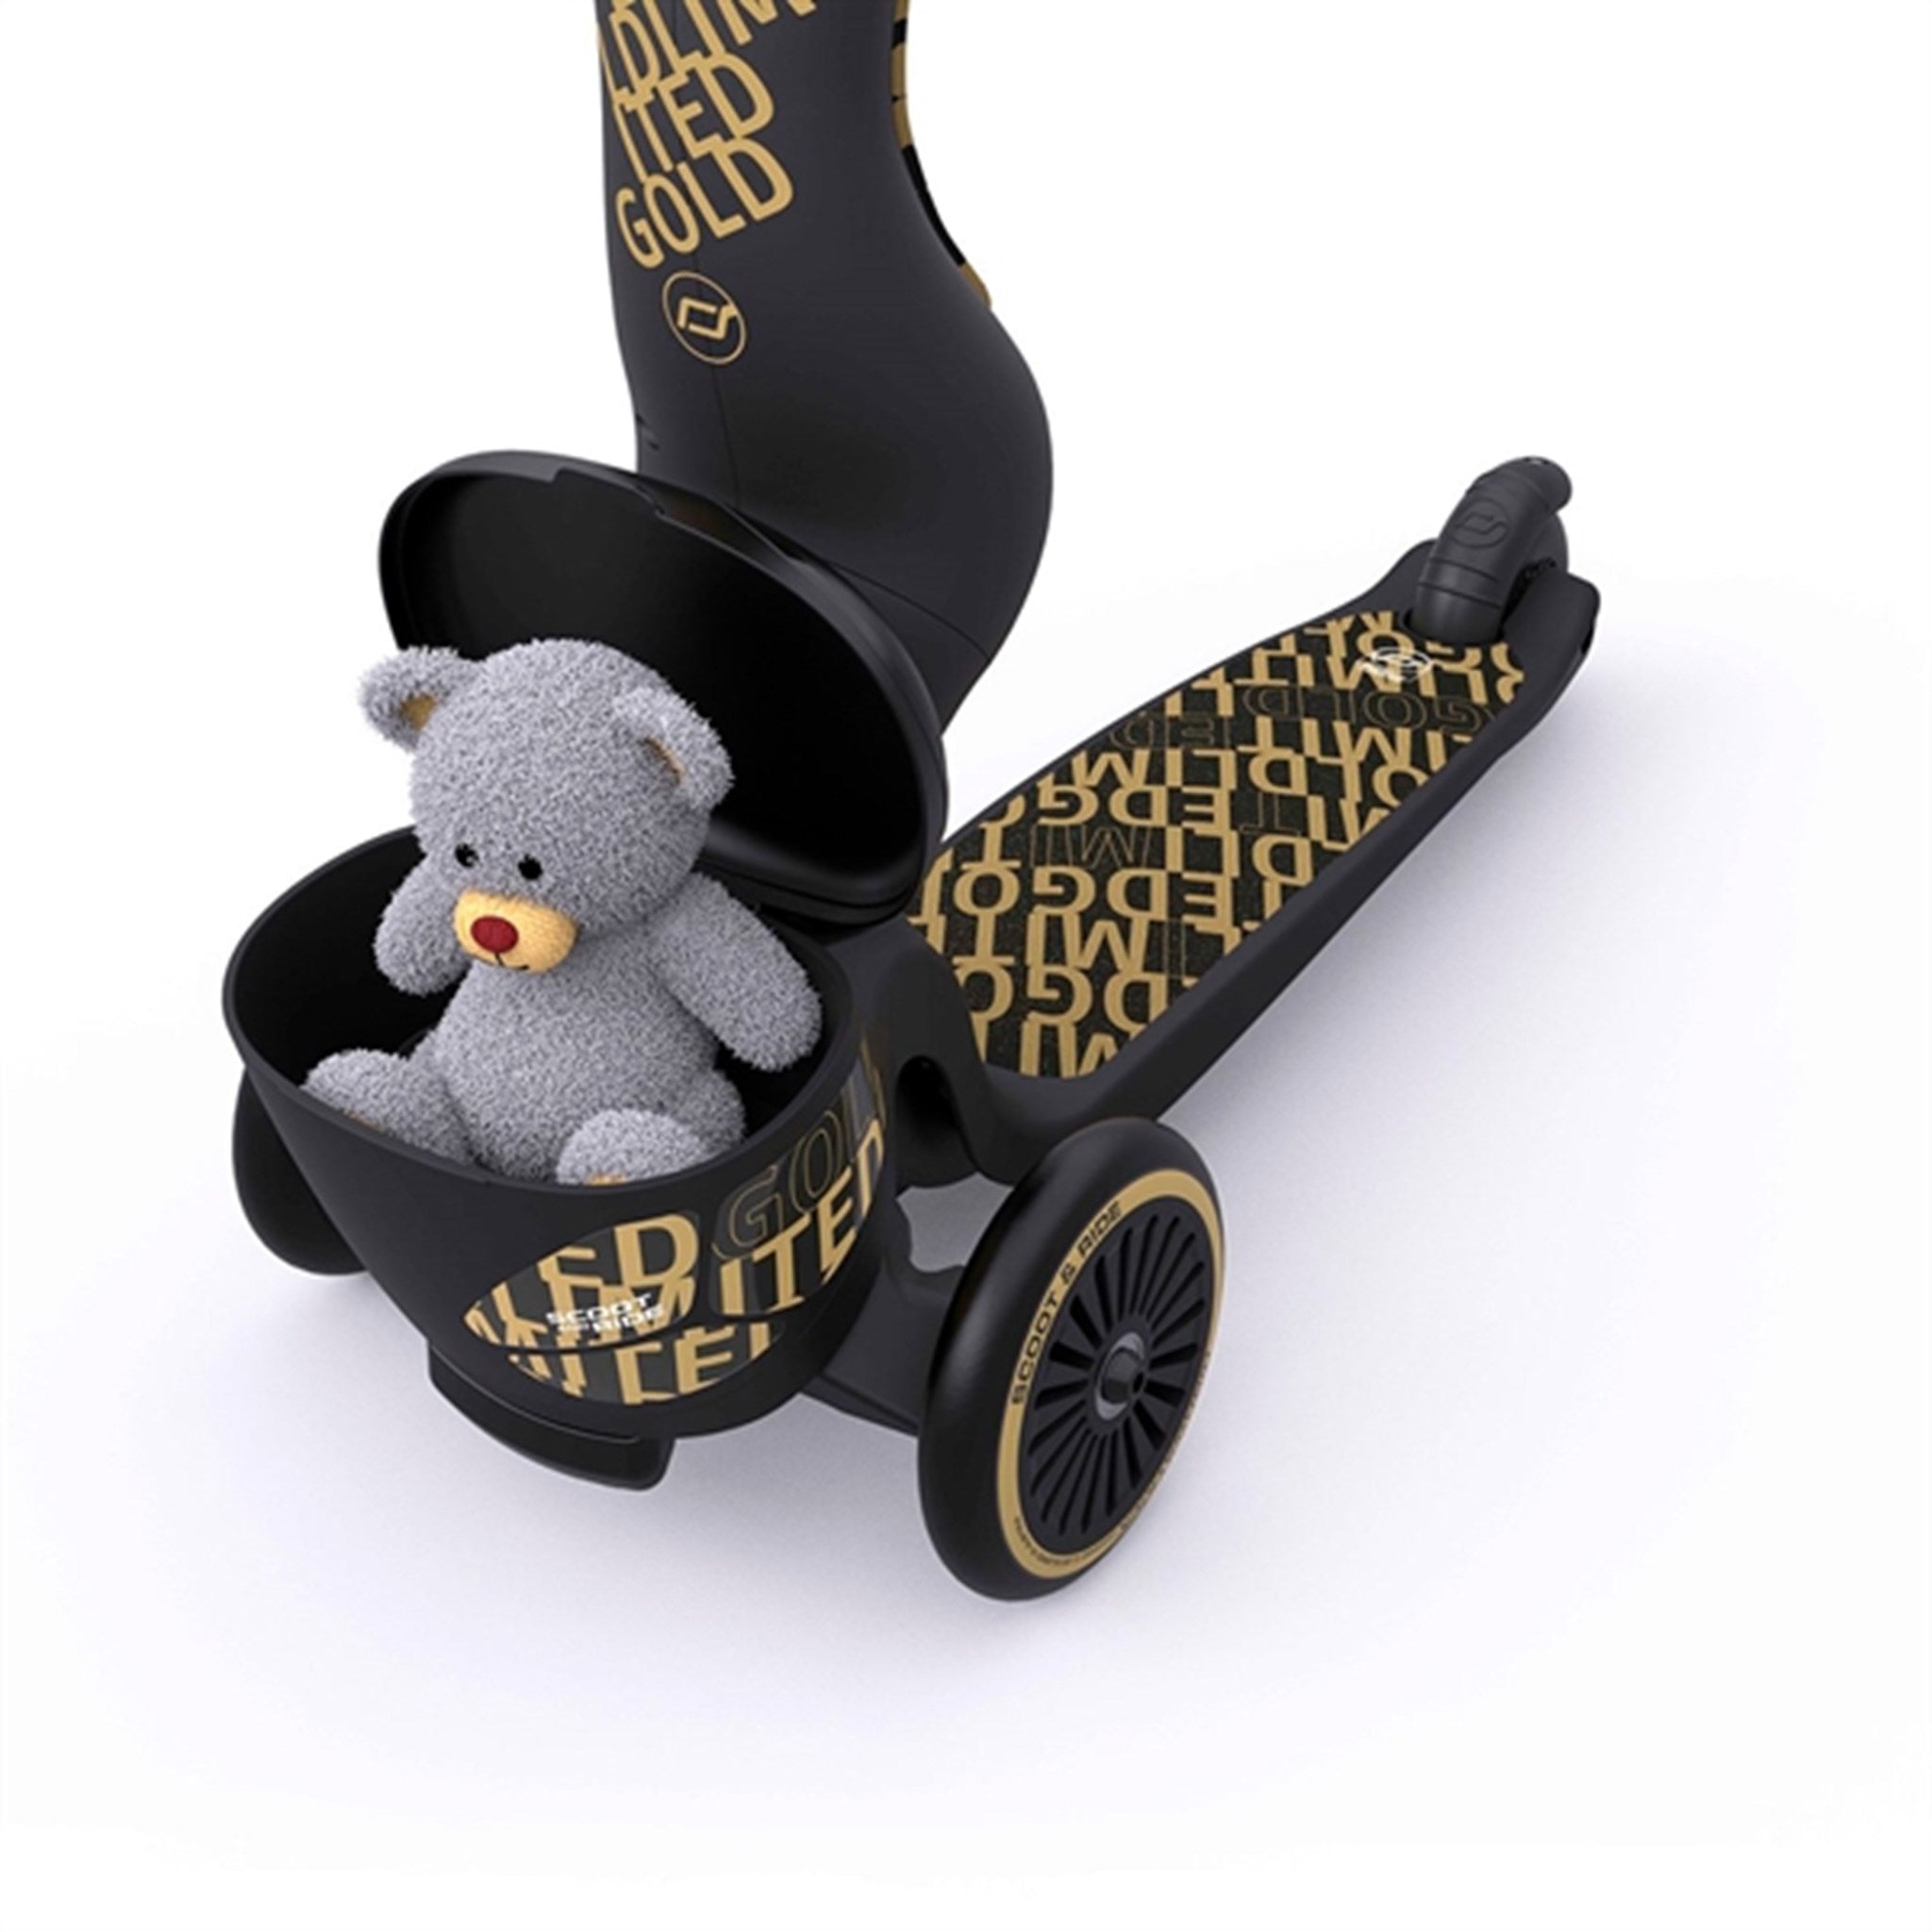 Scoot and Ride Highway Kick 1 Lifestyle Black/Gold 9